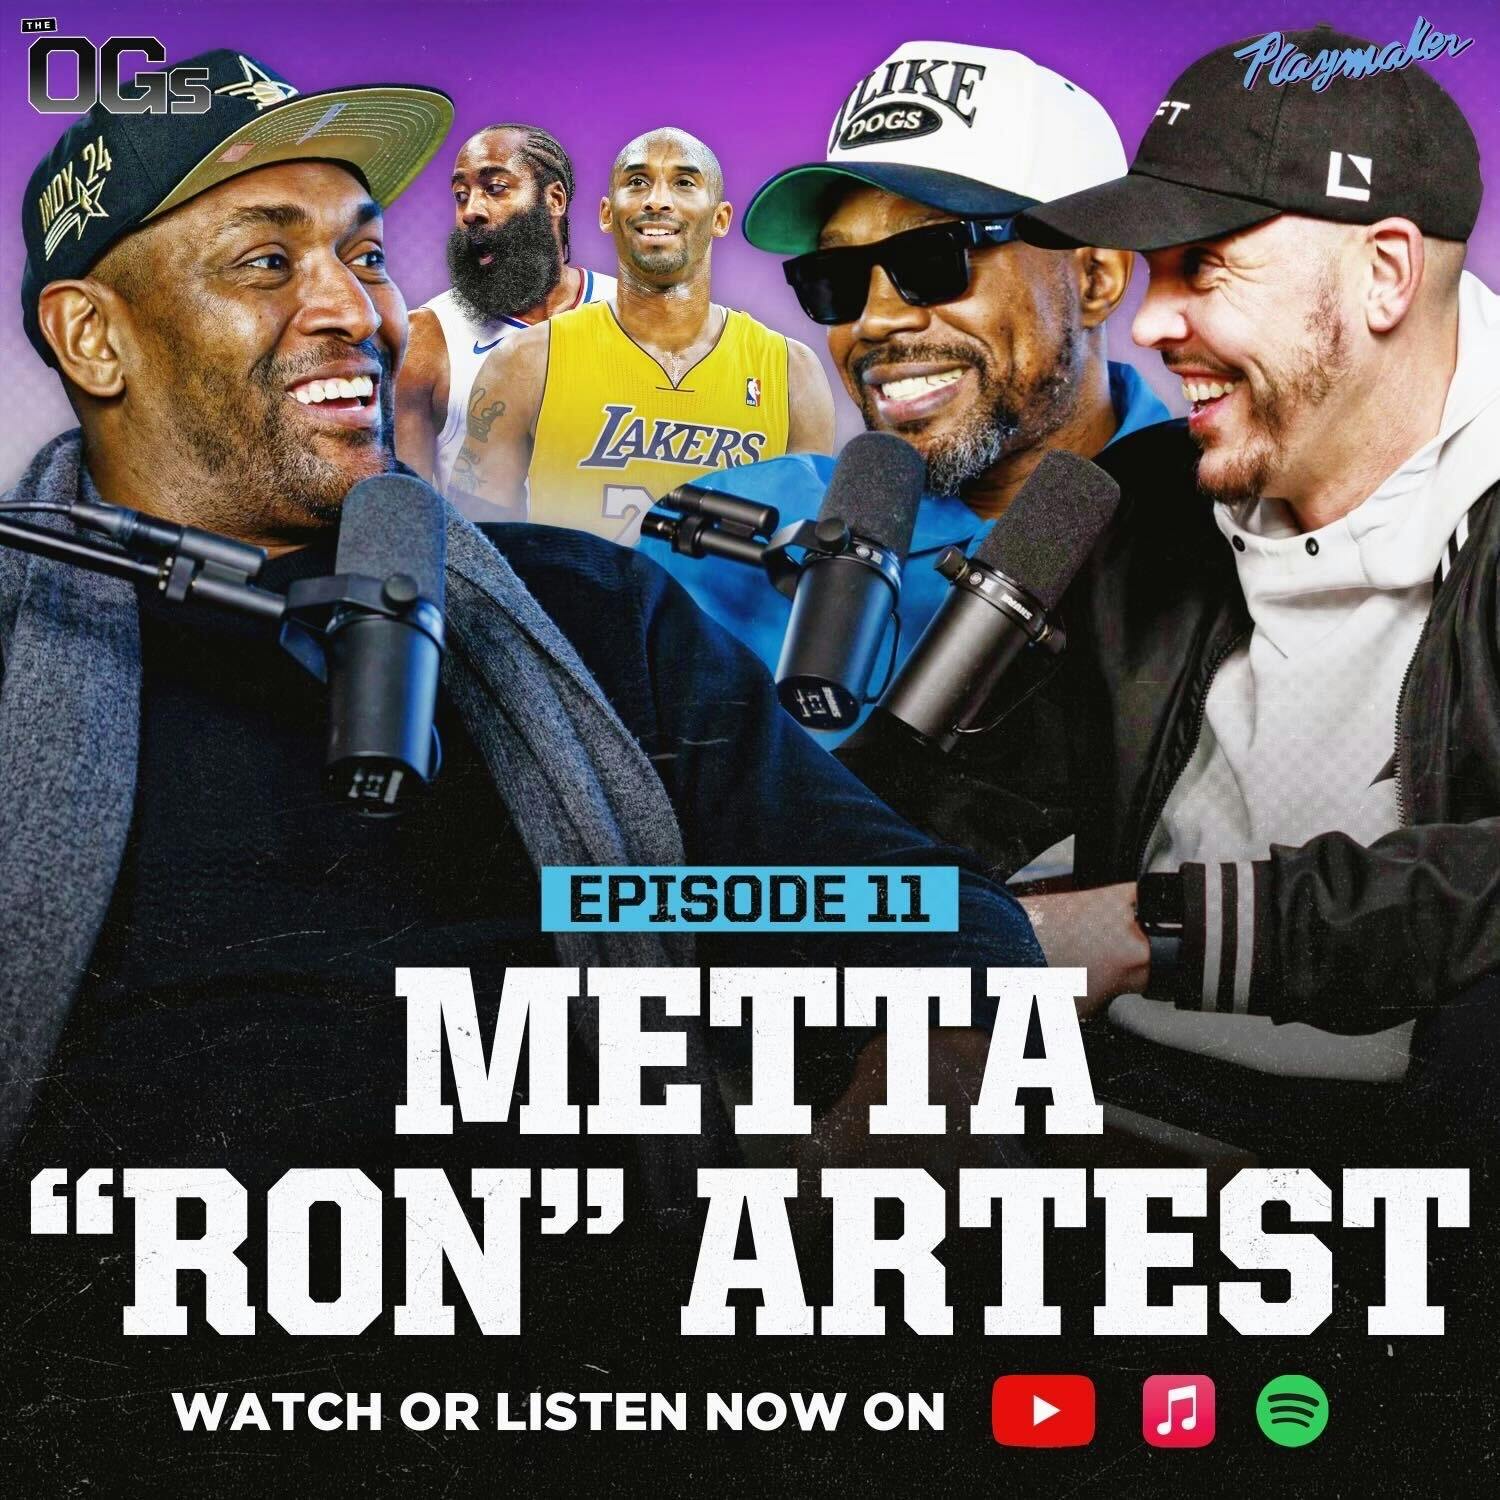 Metta “Ron” Artest Reveals Why He Hit James Harden, Untold Kobe & NBA Fight Stories| The OGs Ep 11